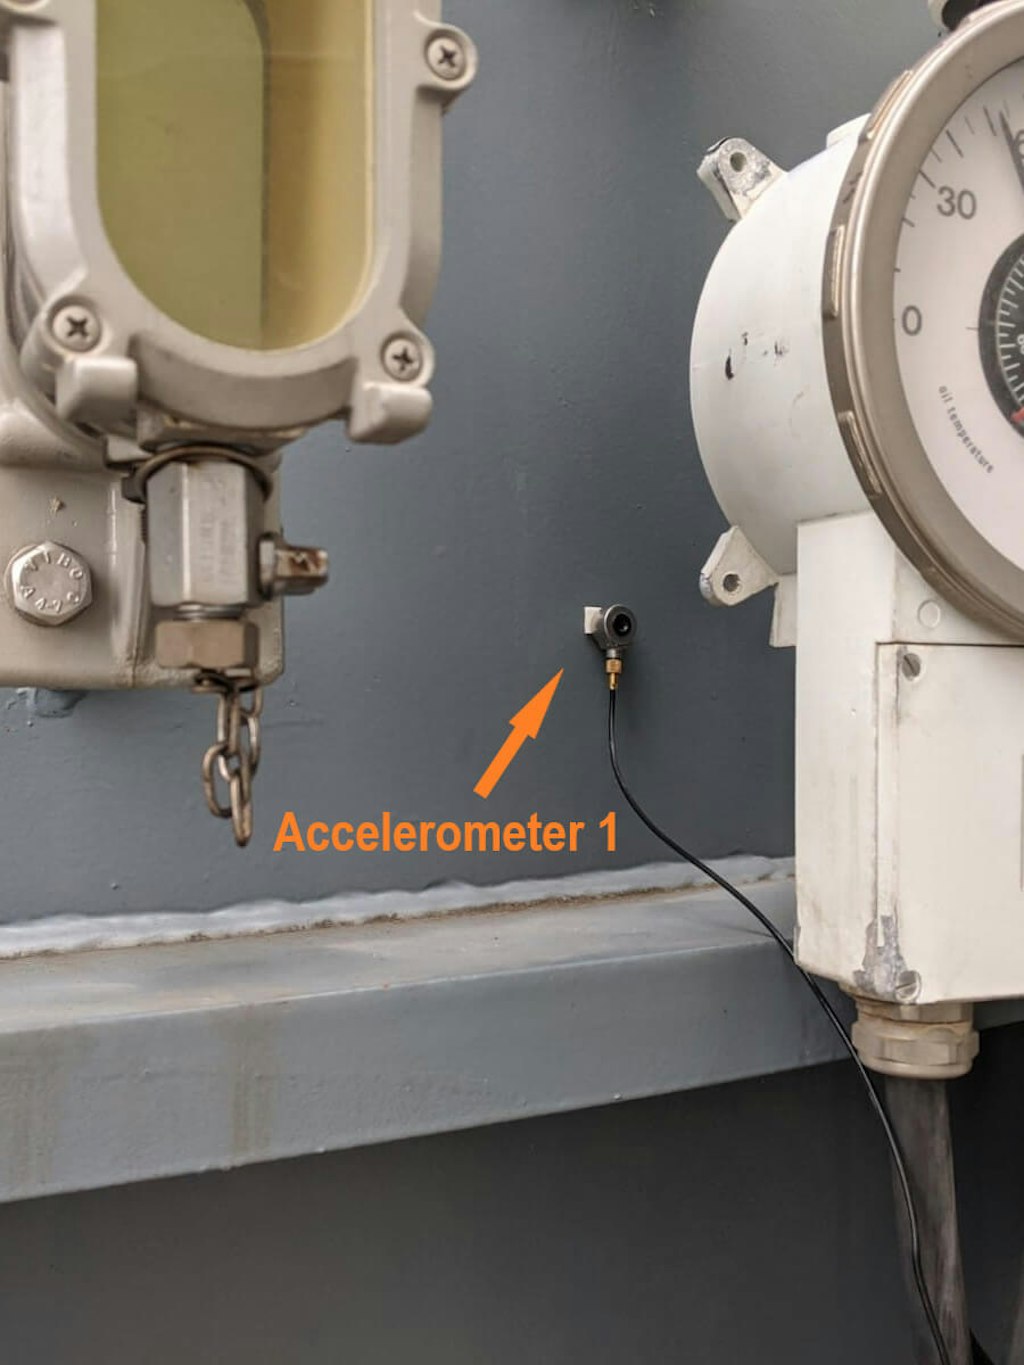 Figure 2. An accelerometer was used at two different positions on the reactor during the test – on the exchanger side and the HV output side.